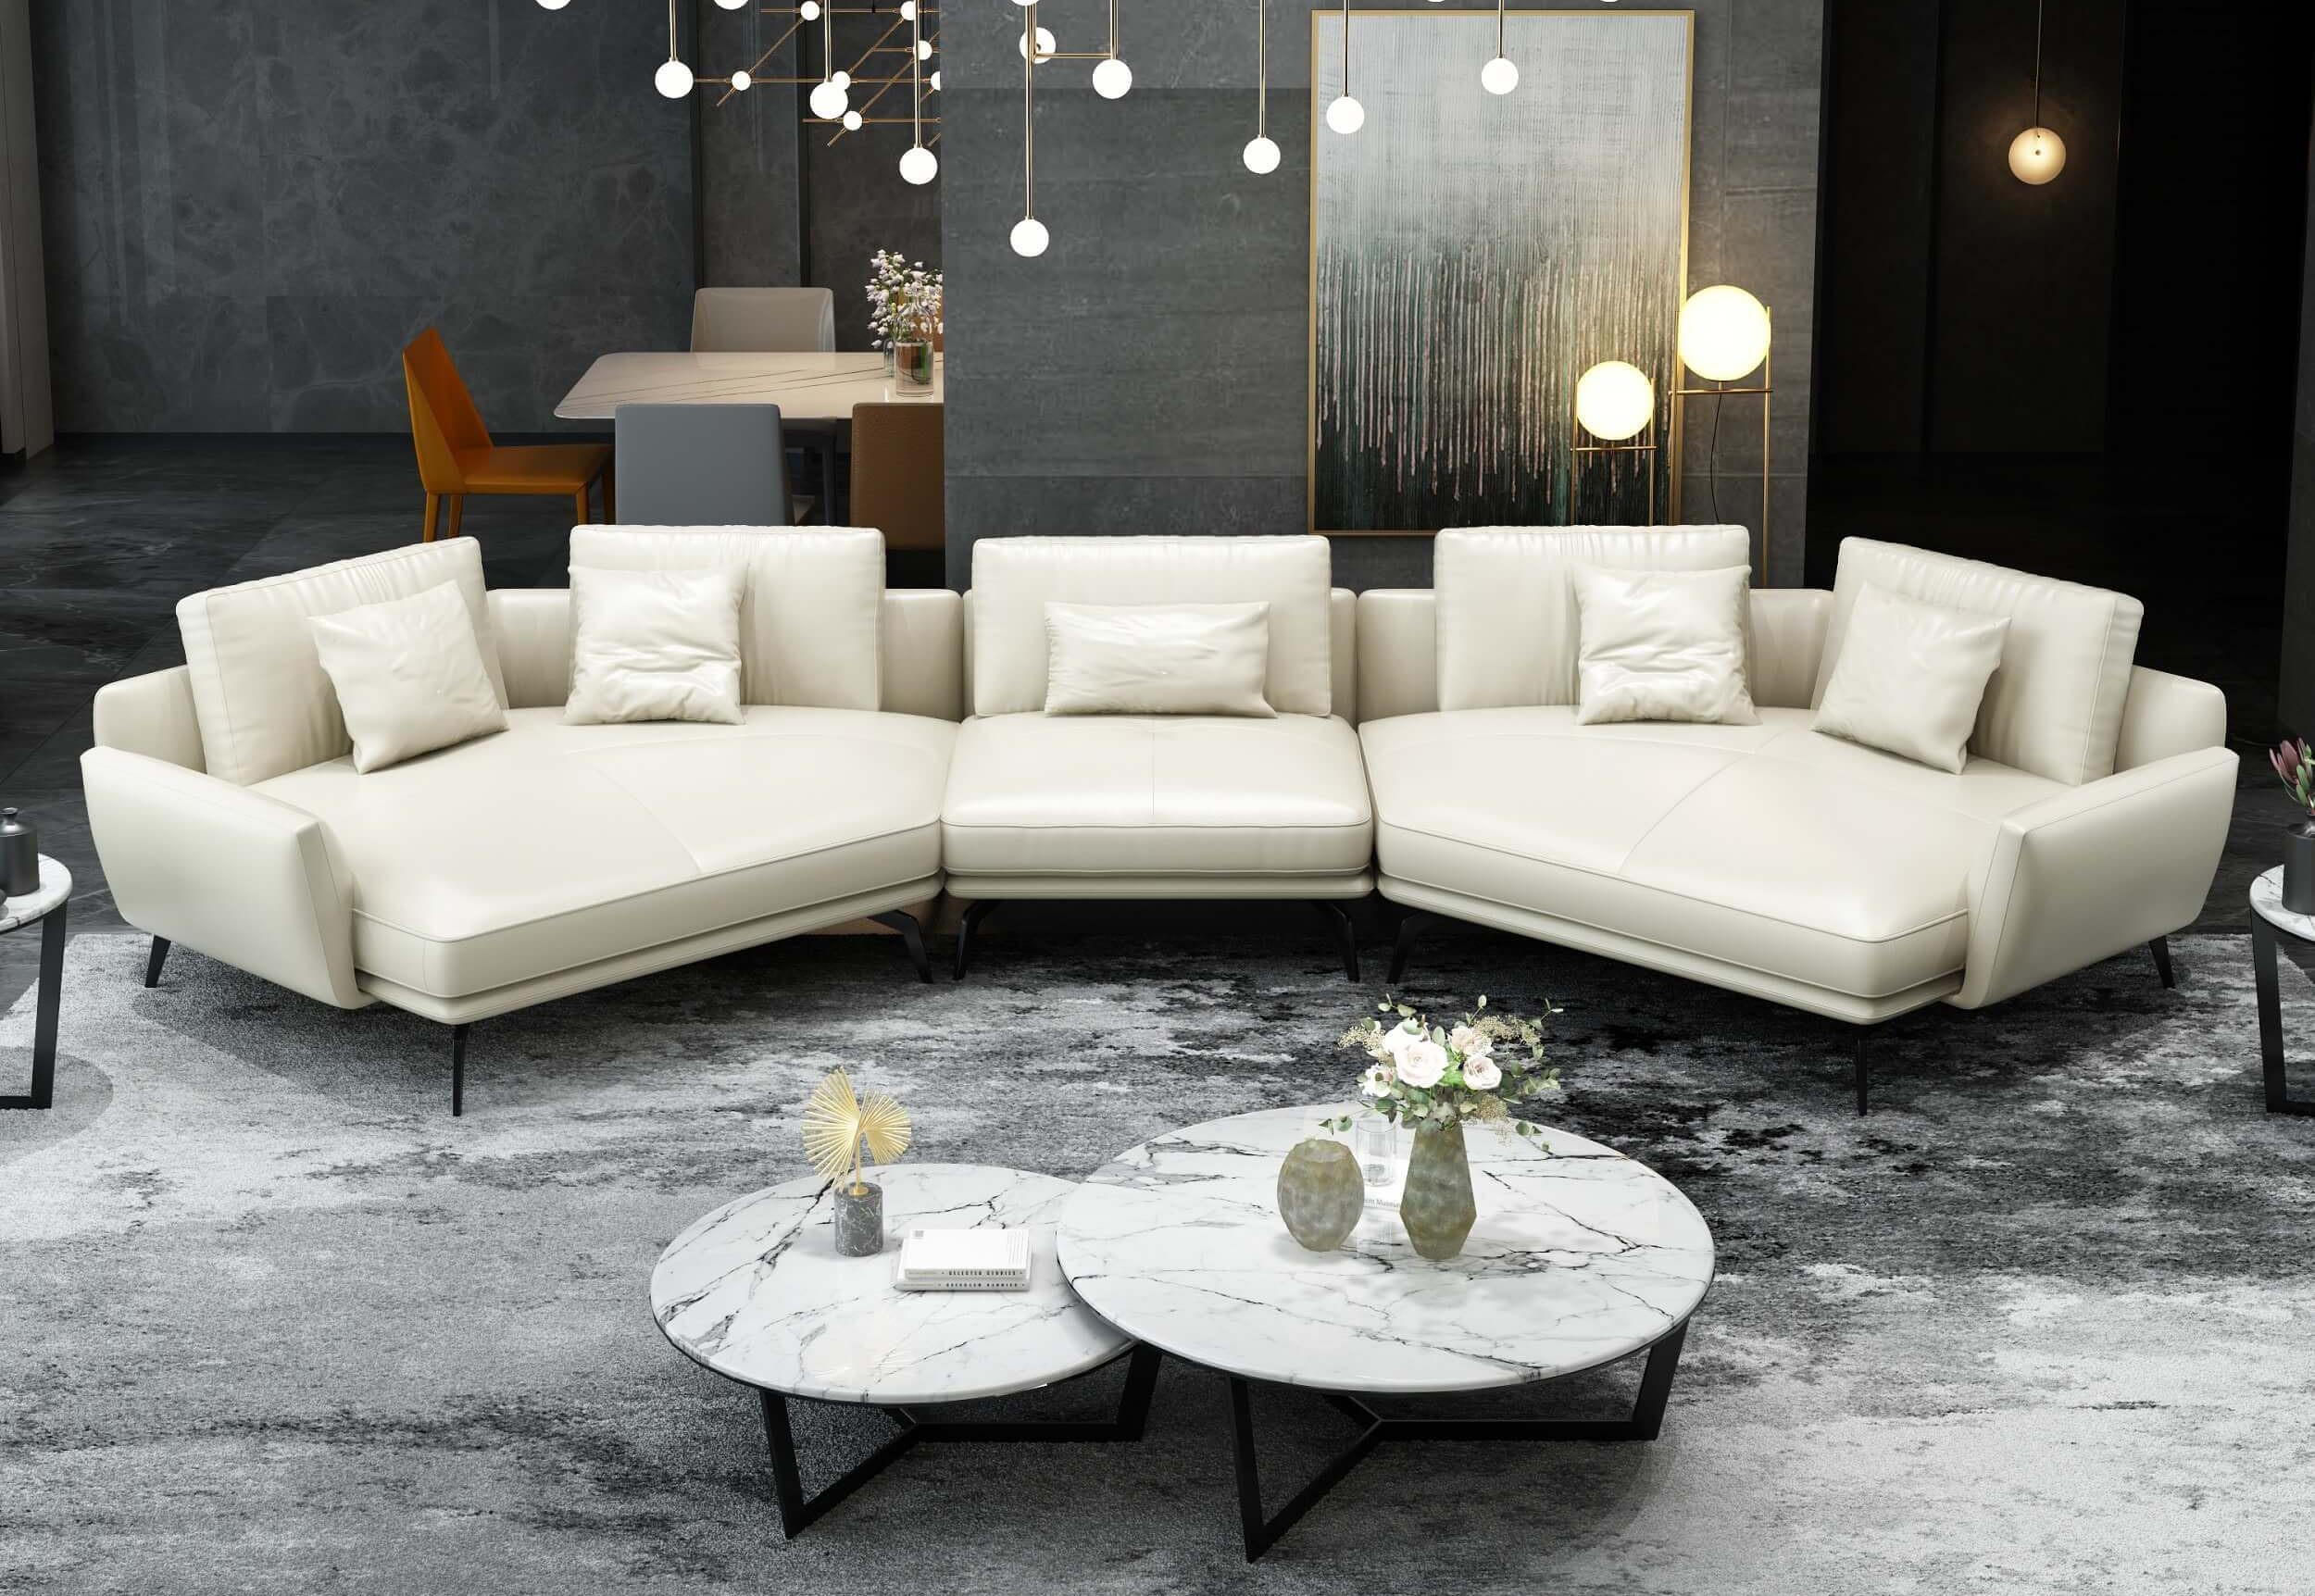 Modern, Vintage Sectional Sofa VENERE EF-65556-5S in Off-White, White Italian Leather